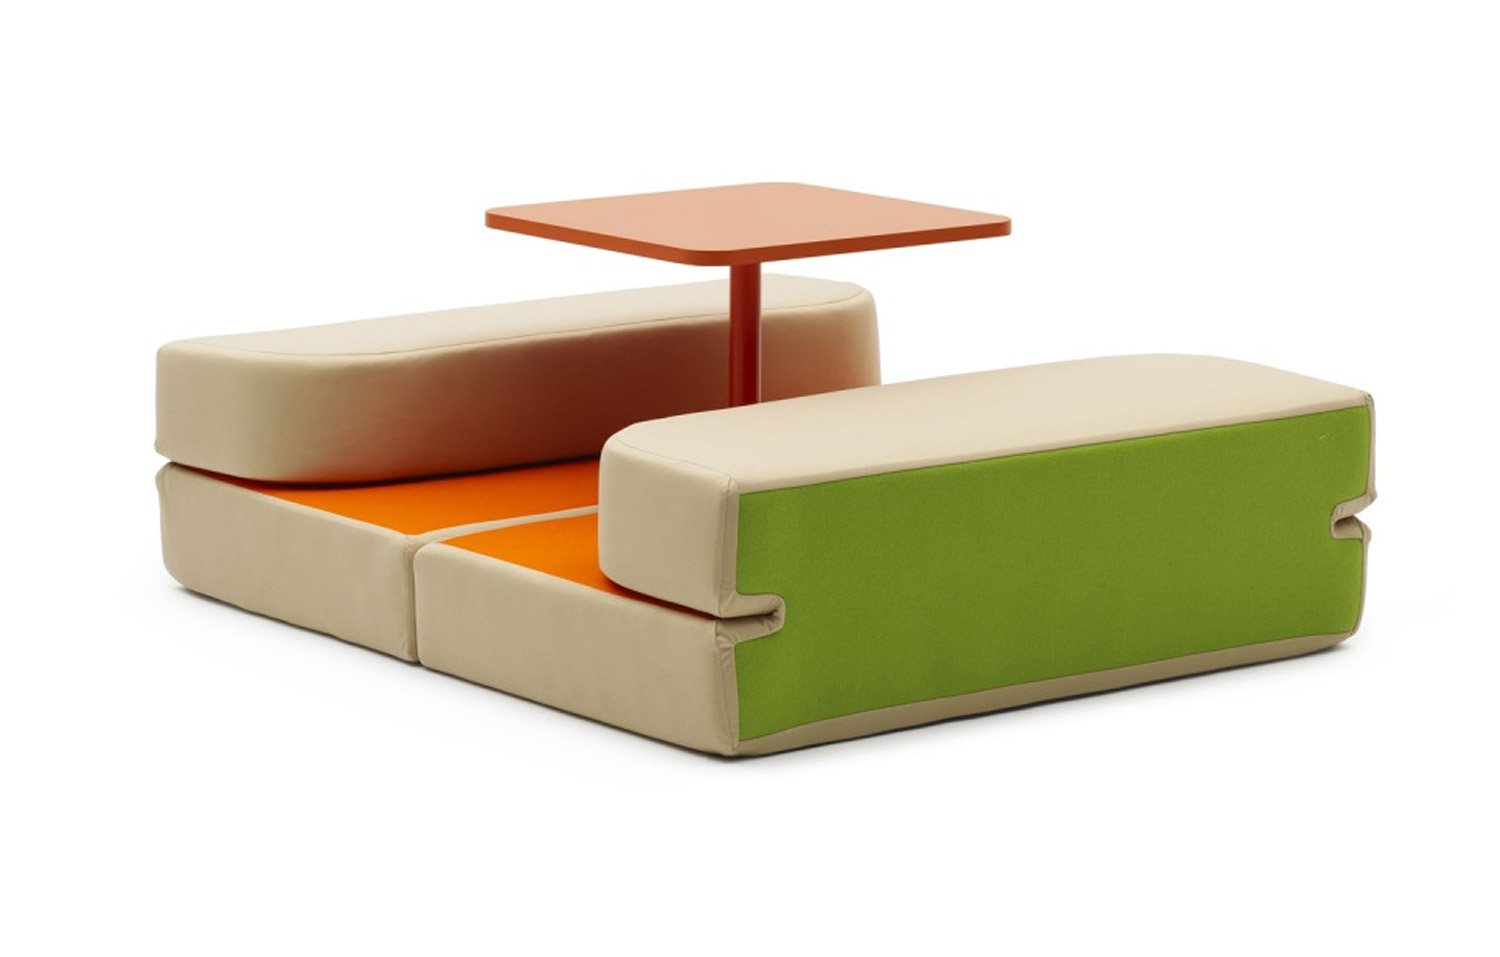 Skin and orange-colored Converting Folding Table To Bed furniture